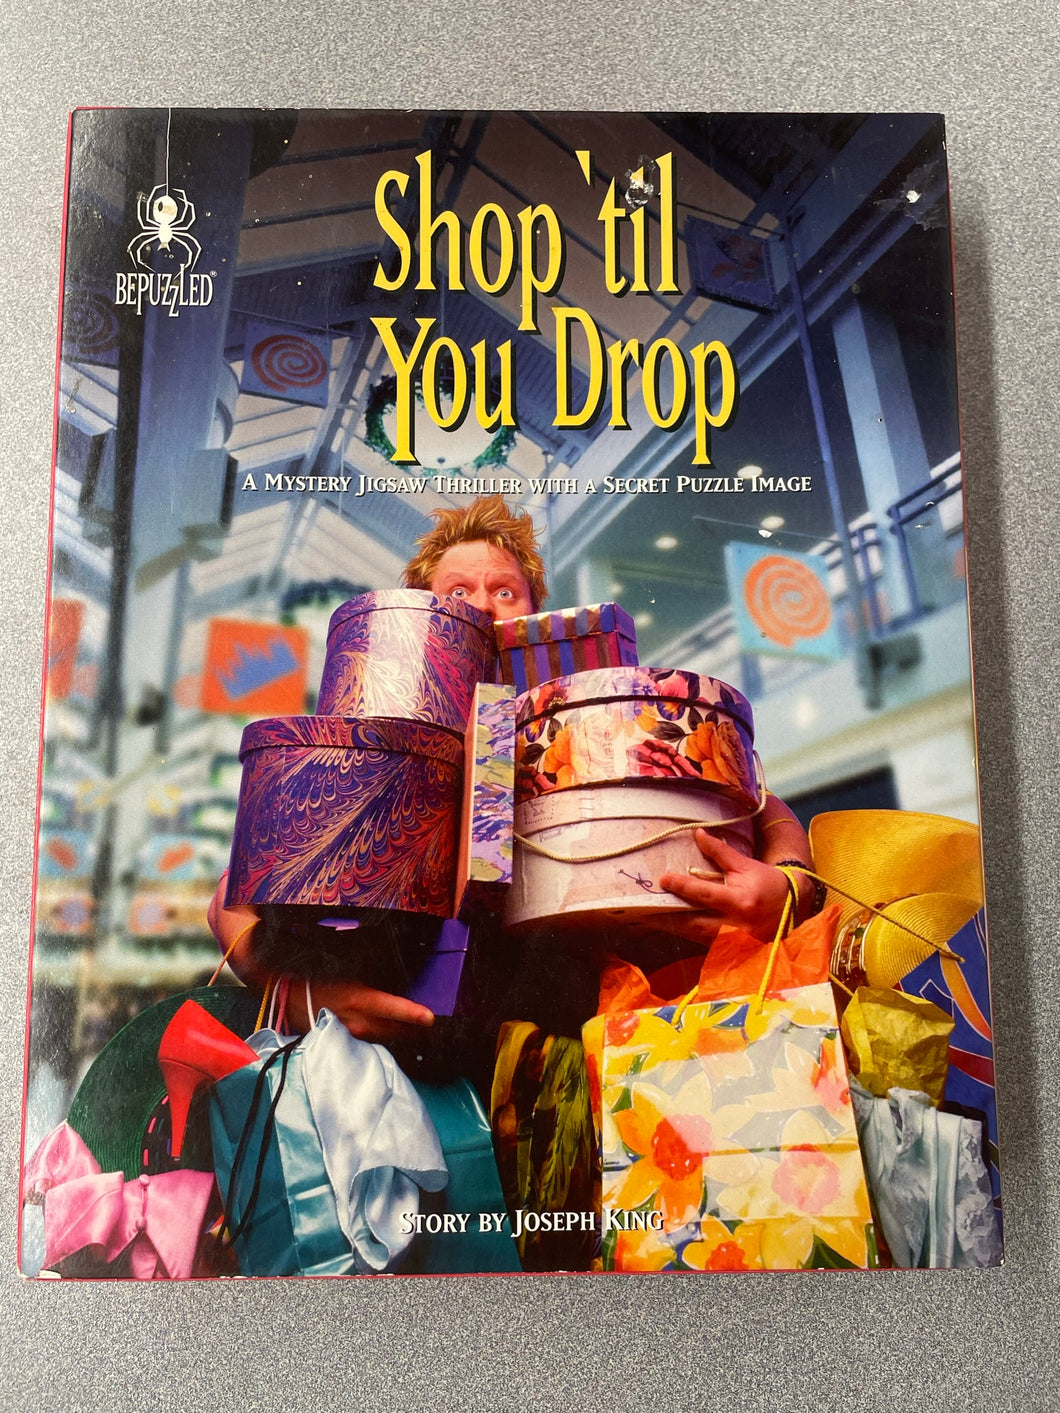 PUZZLE: Shop 'Til You Drop: a Mystery Jigsaw Thriller with a Secret Puzzle Image, King, Joseph [1995] CG 8/23